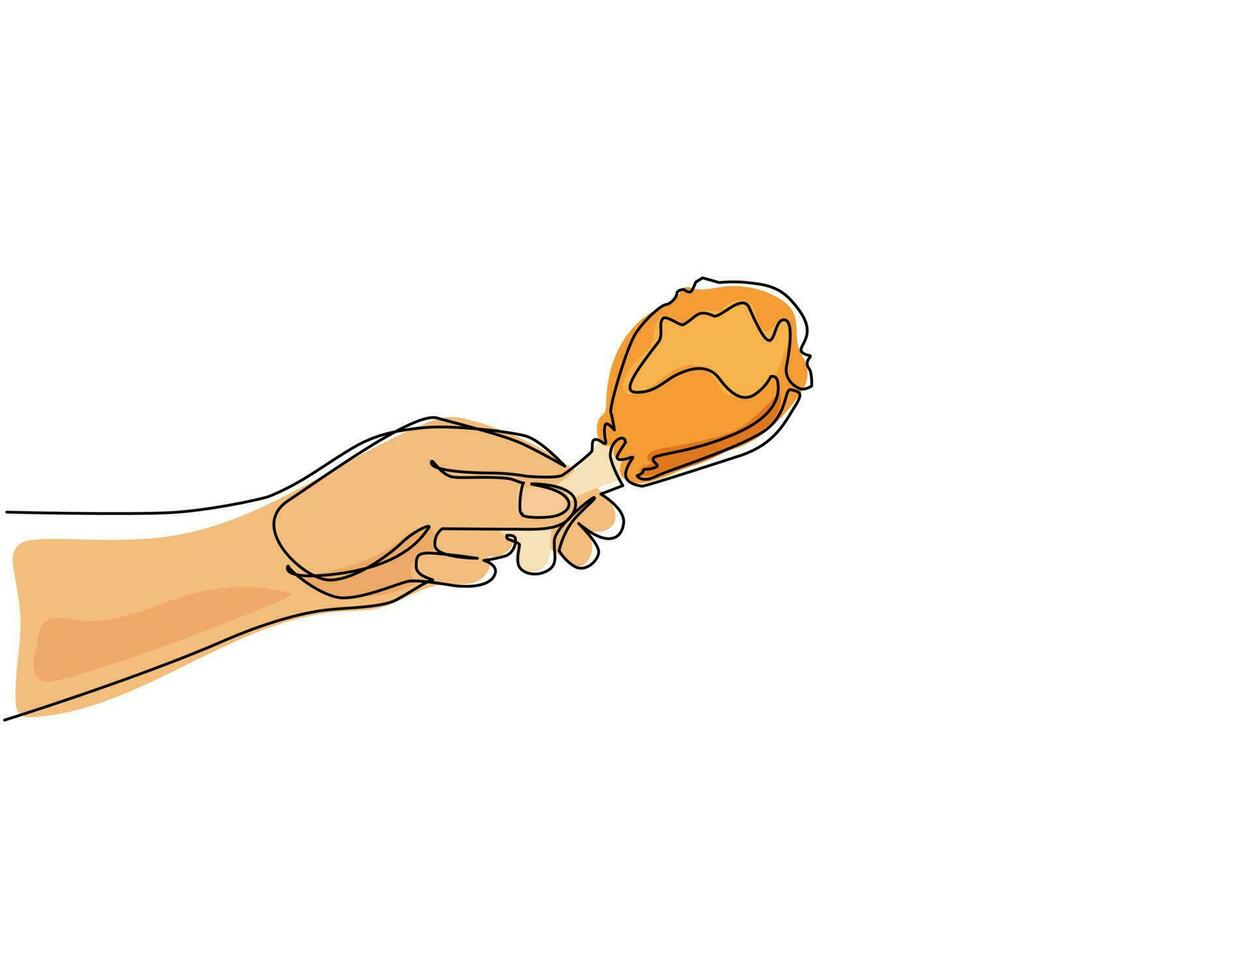 Continuous one line drawing man hand holding fried chicken drumstick, sketch style. Hand holding fried, grilled, roasted chicken drumstick, leg. Single line draw design vector graphic illustration